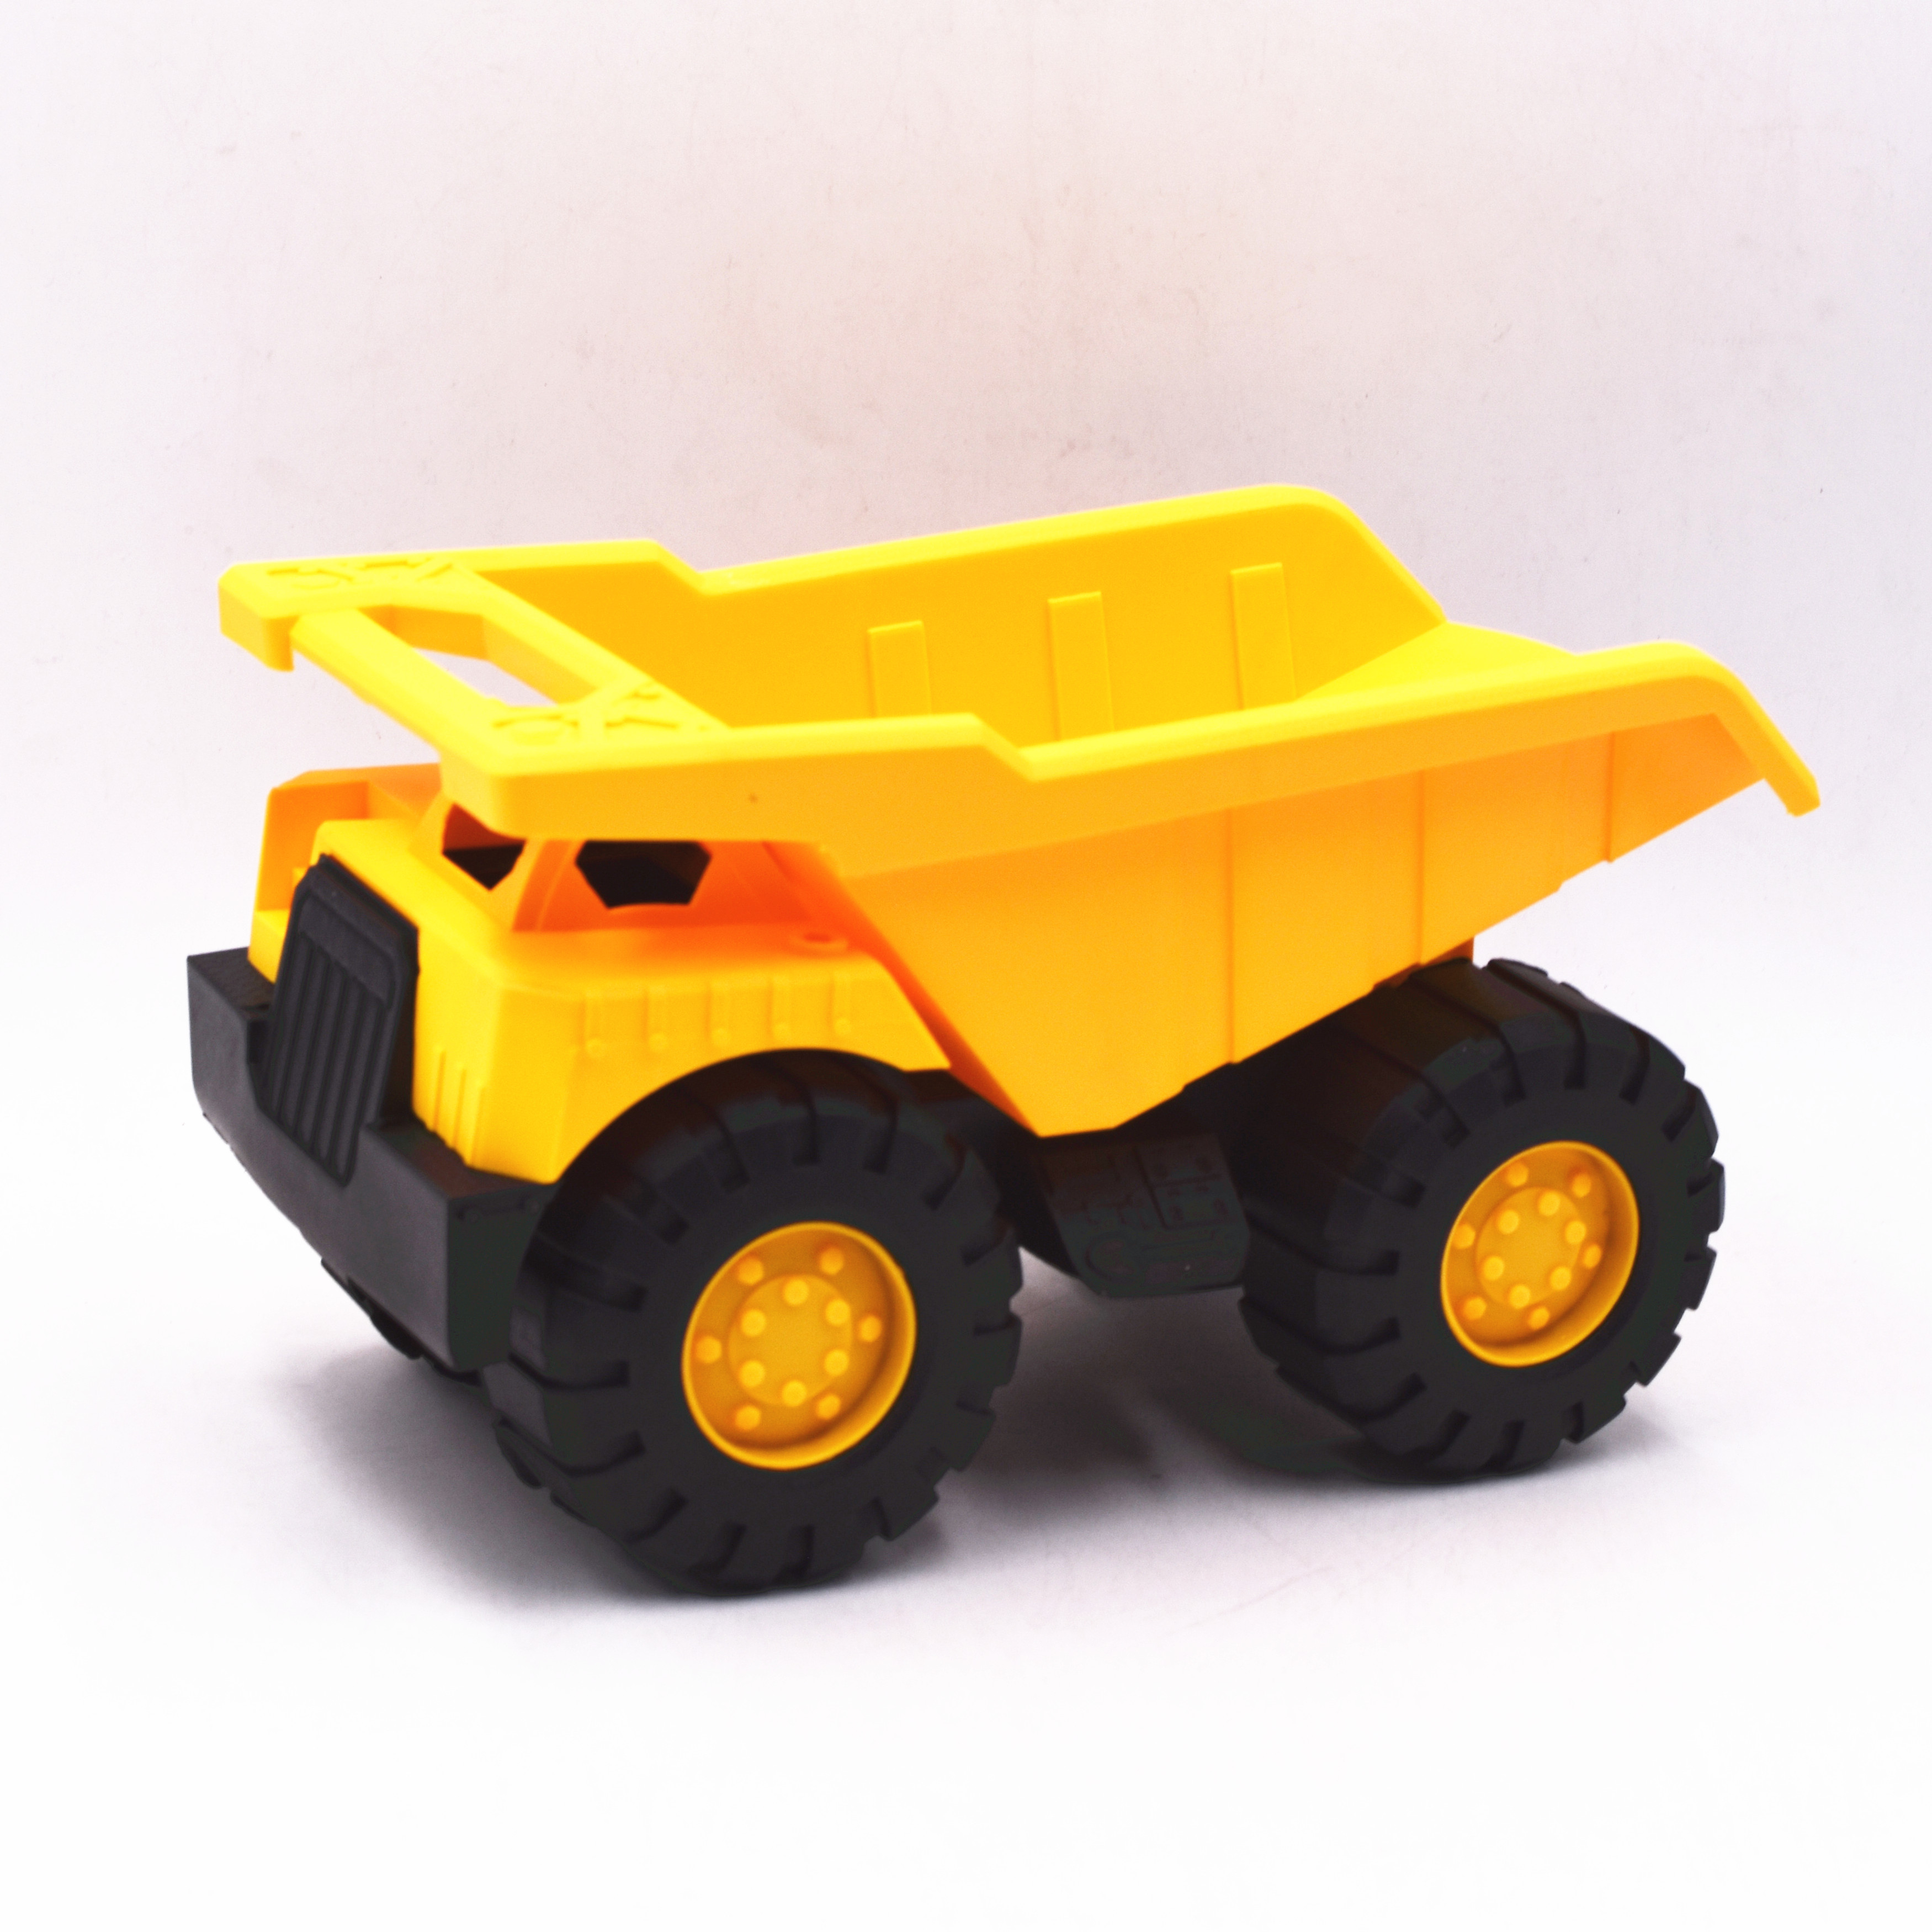 FREE WHEEL TRUCK TOY LY1764